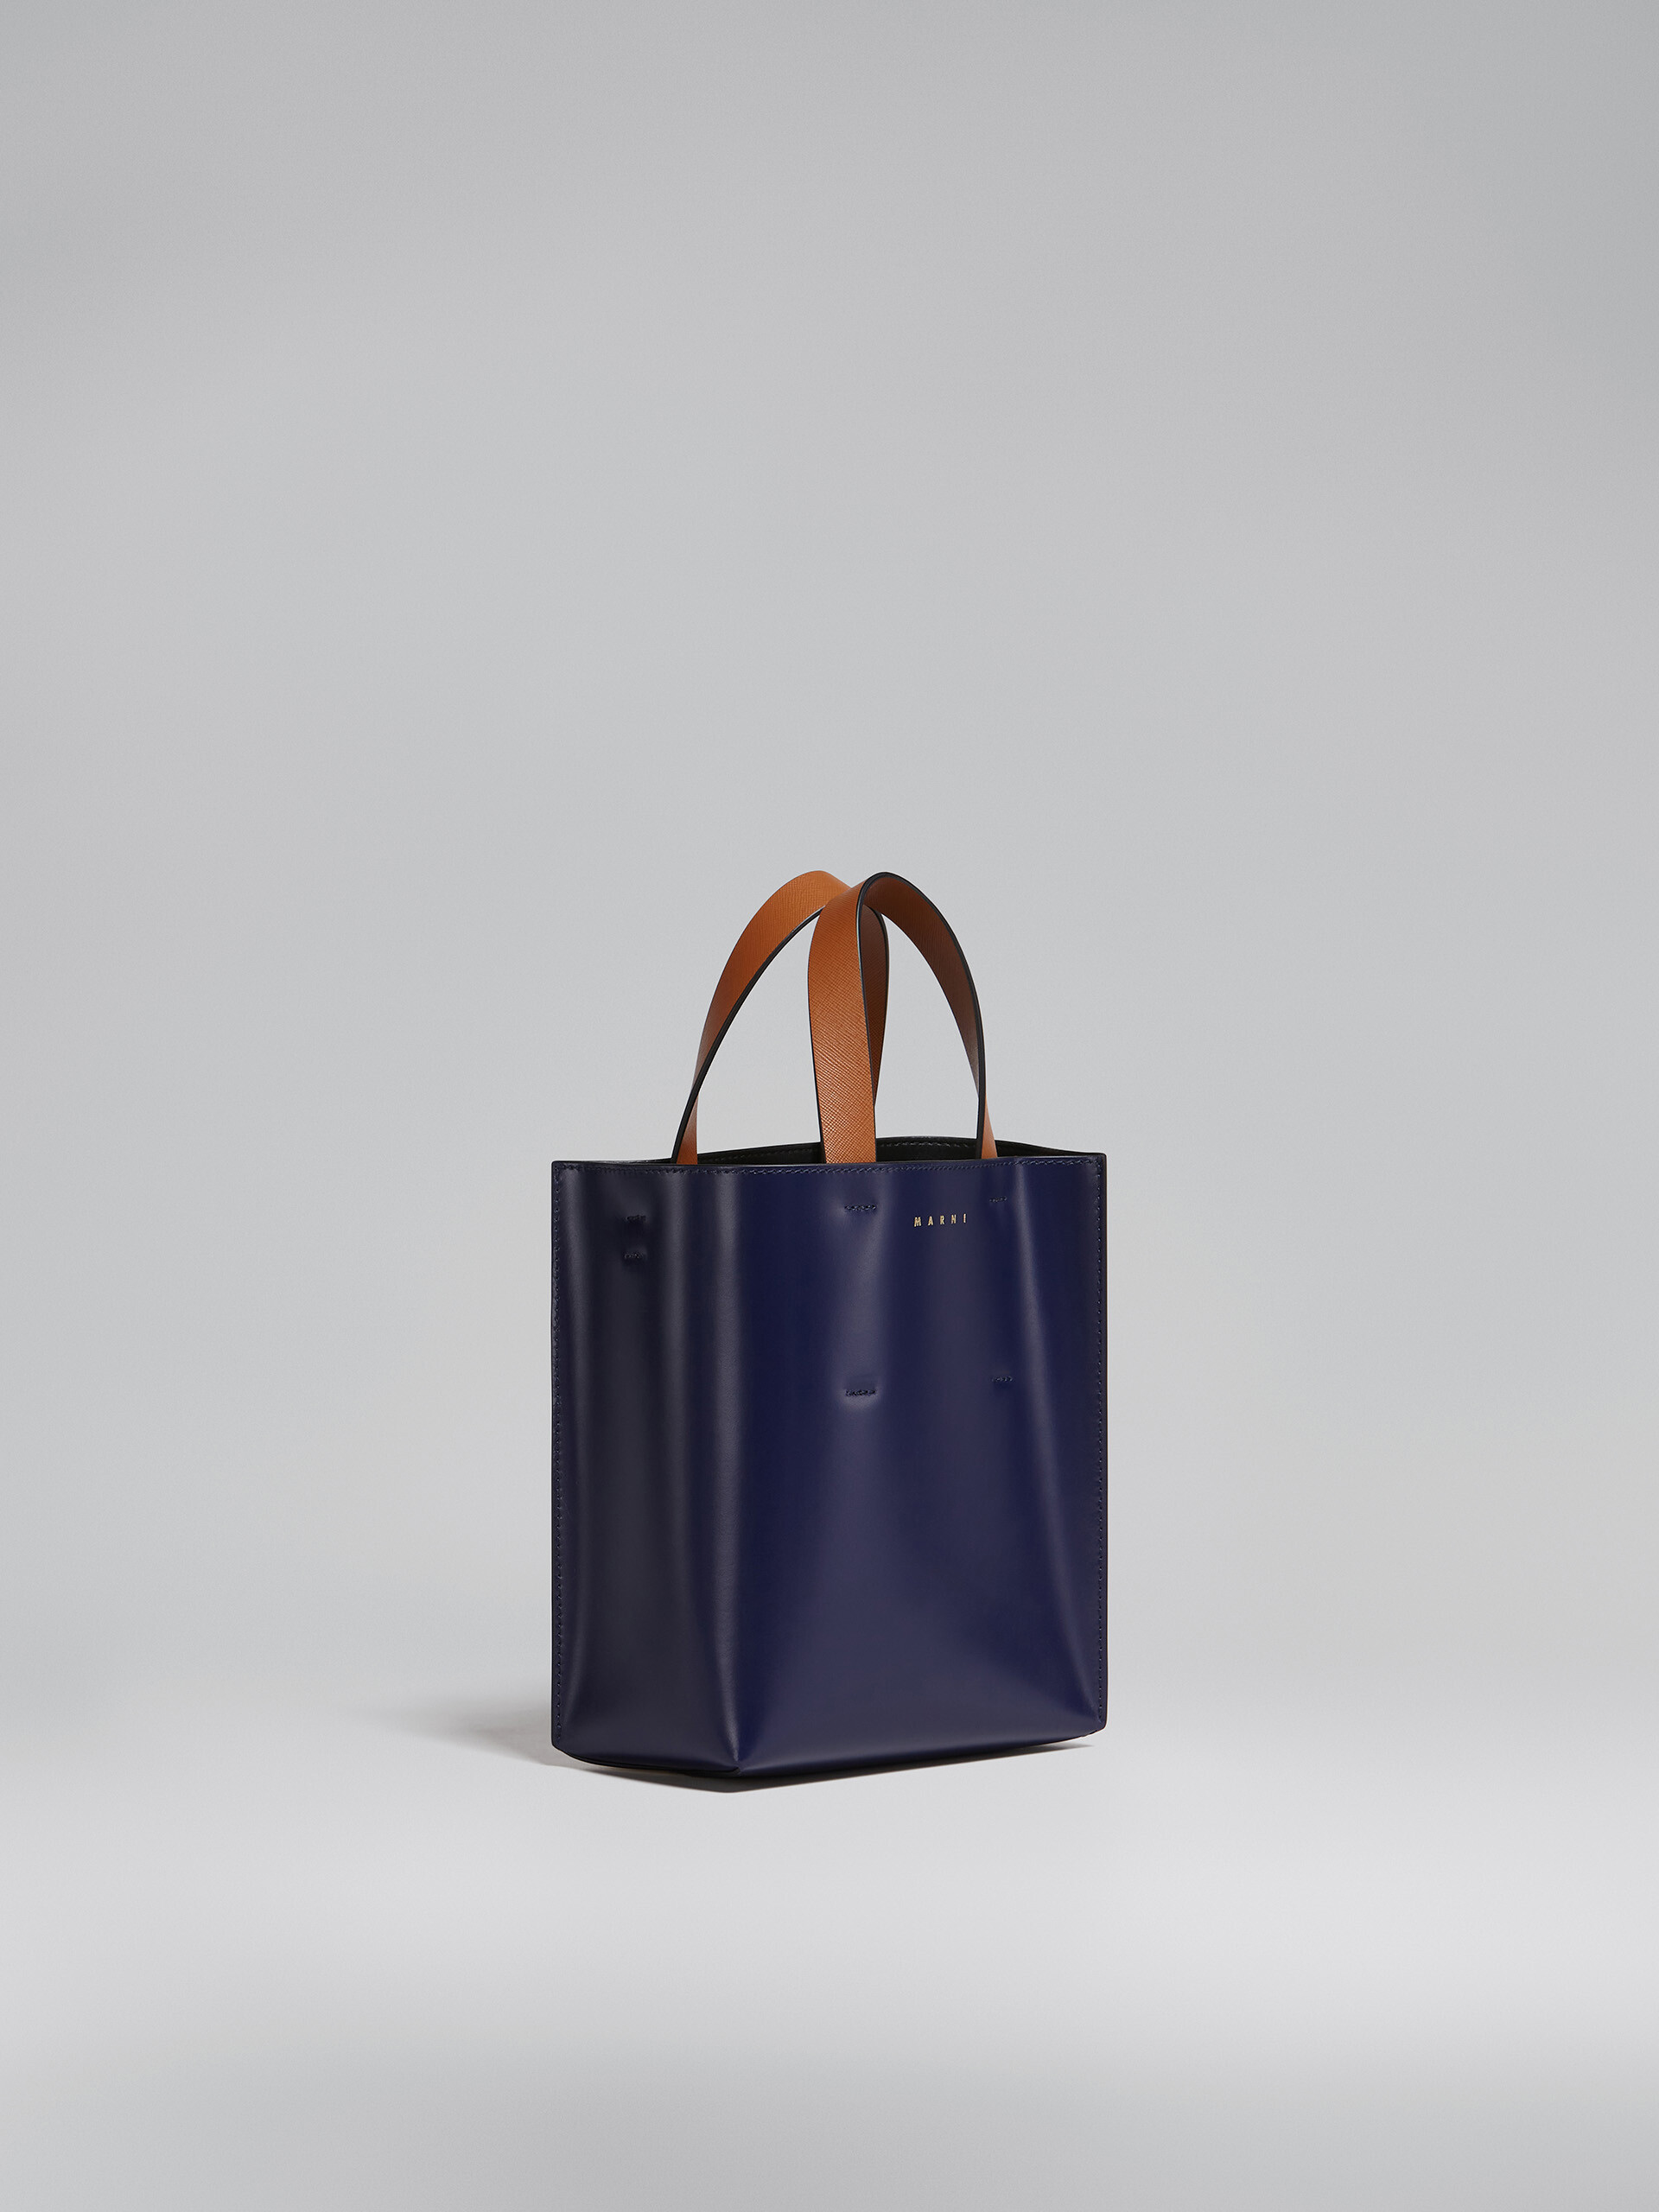 MUSEO mini bag in blue and white leather - Shopping Bags - Image 6